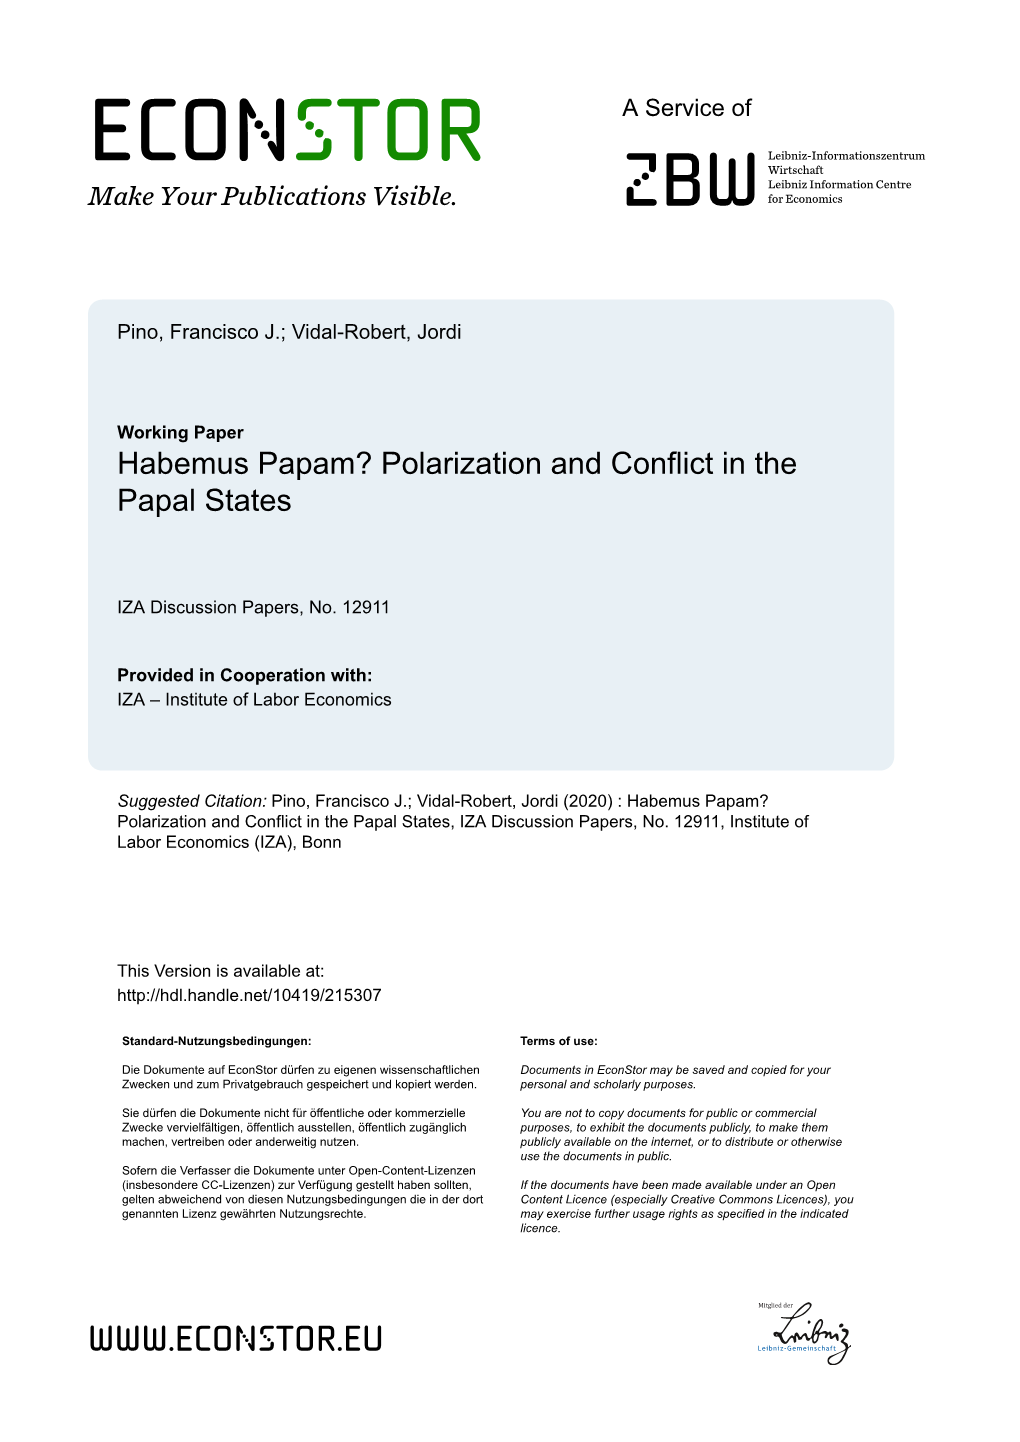 Habemus Papam? Polarization and Conflict in the Papal States